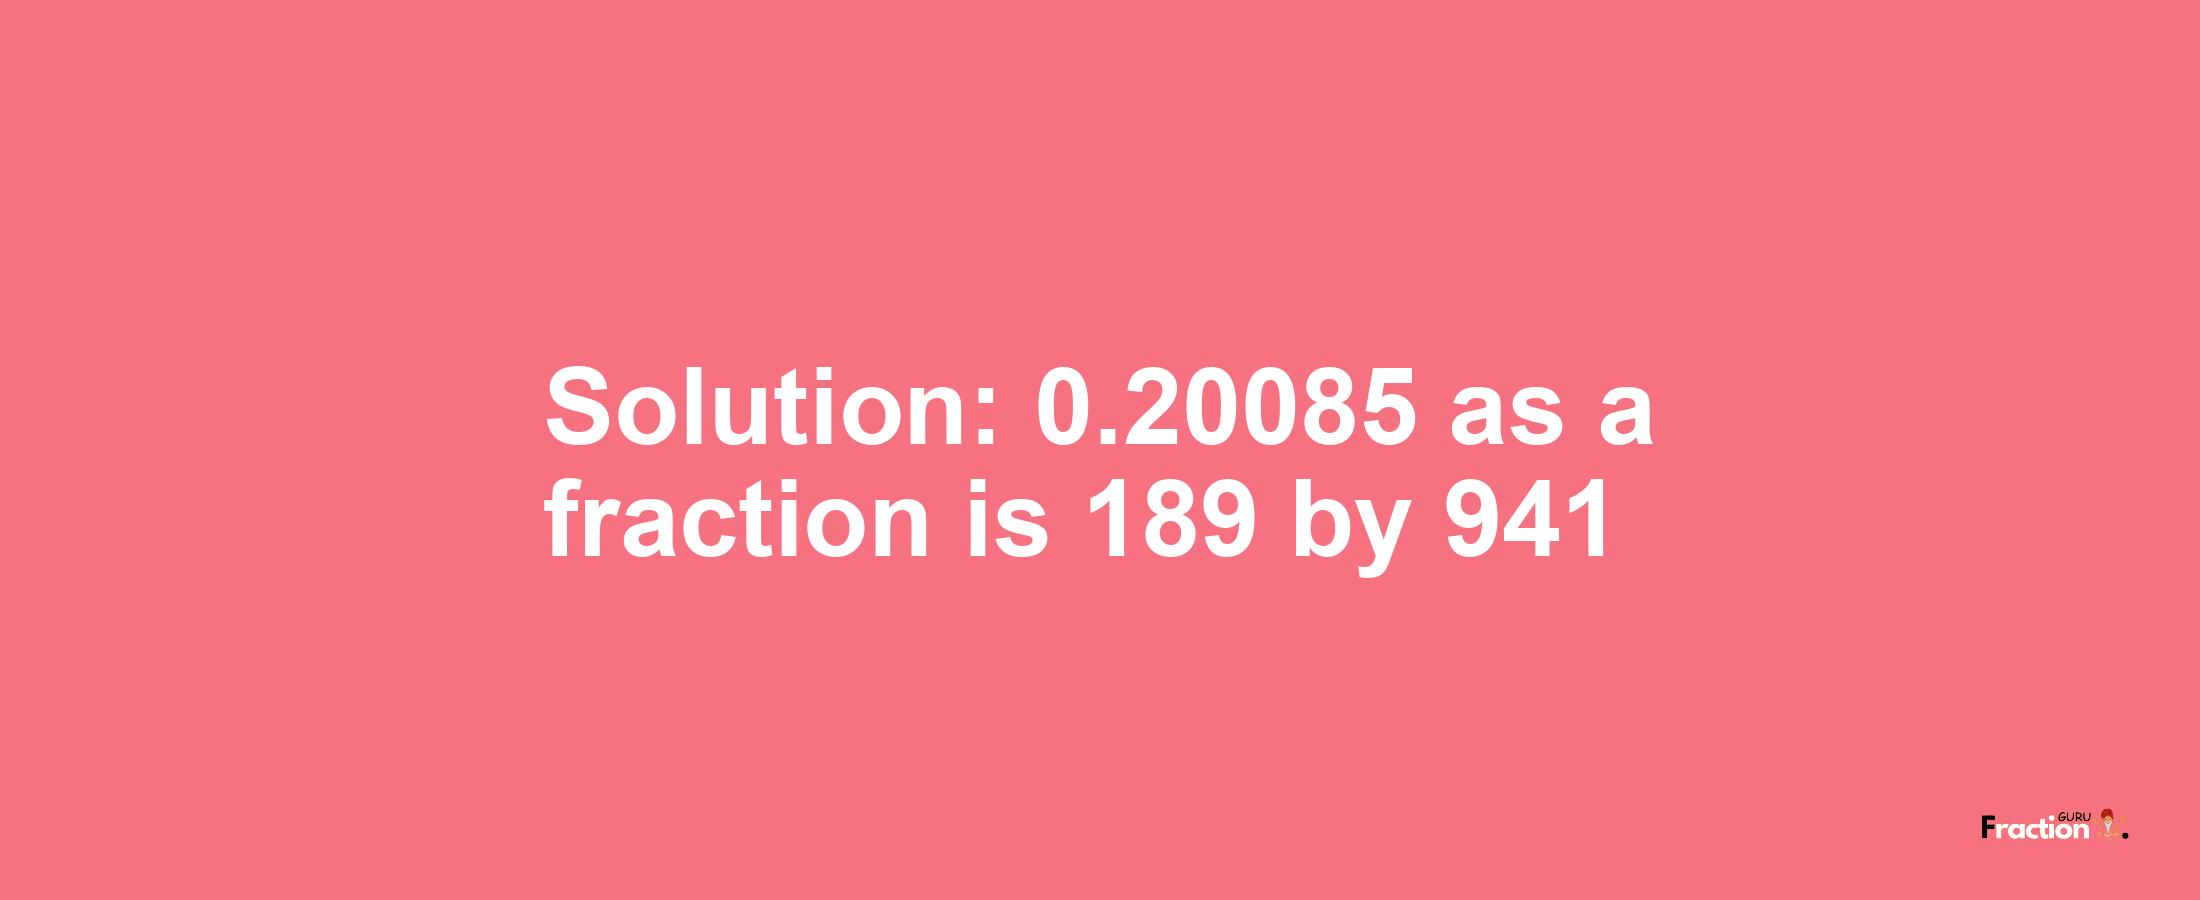 Solution:0.20085 as a fraction is 189/941